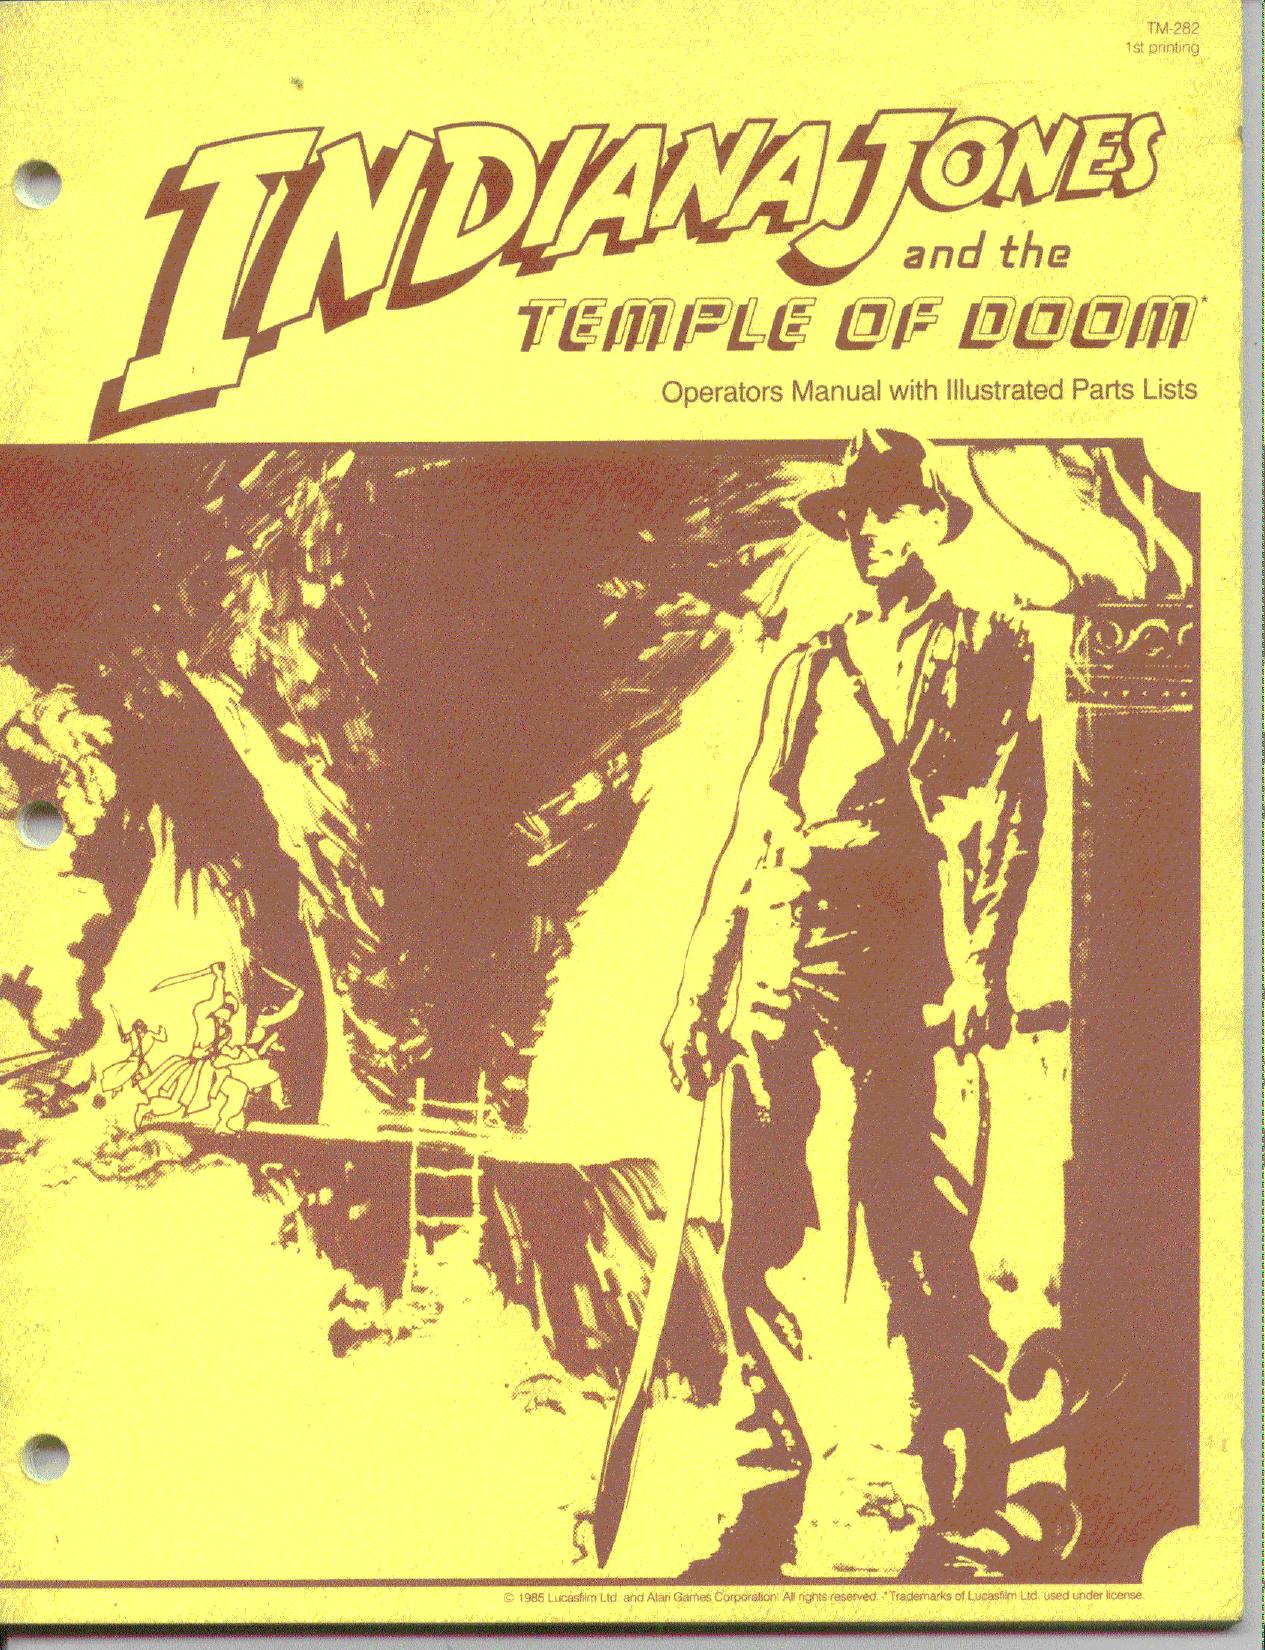 Indiana Jones and the Temple of Doom TM-282 1st Printing